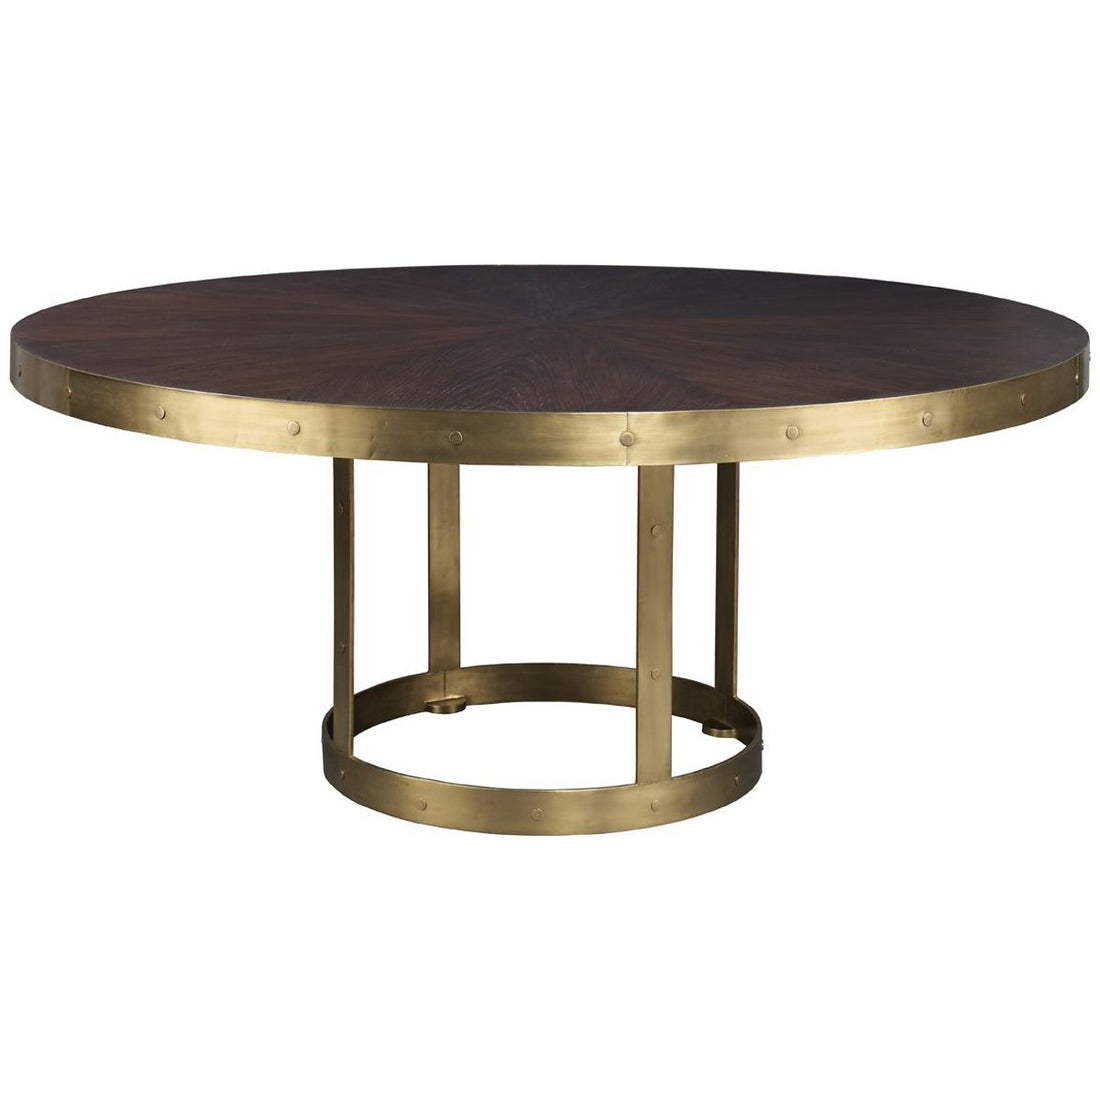 Lillian August Grant 72-Inch Dining Table